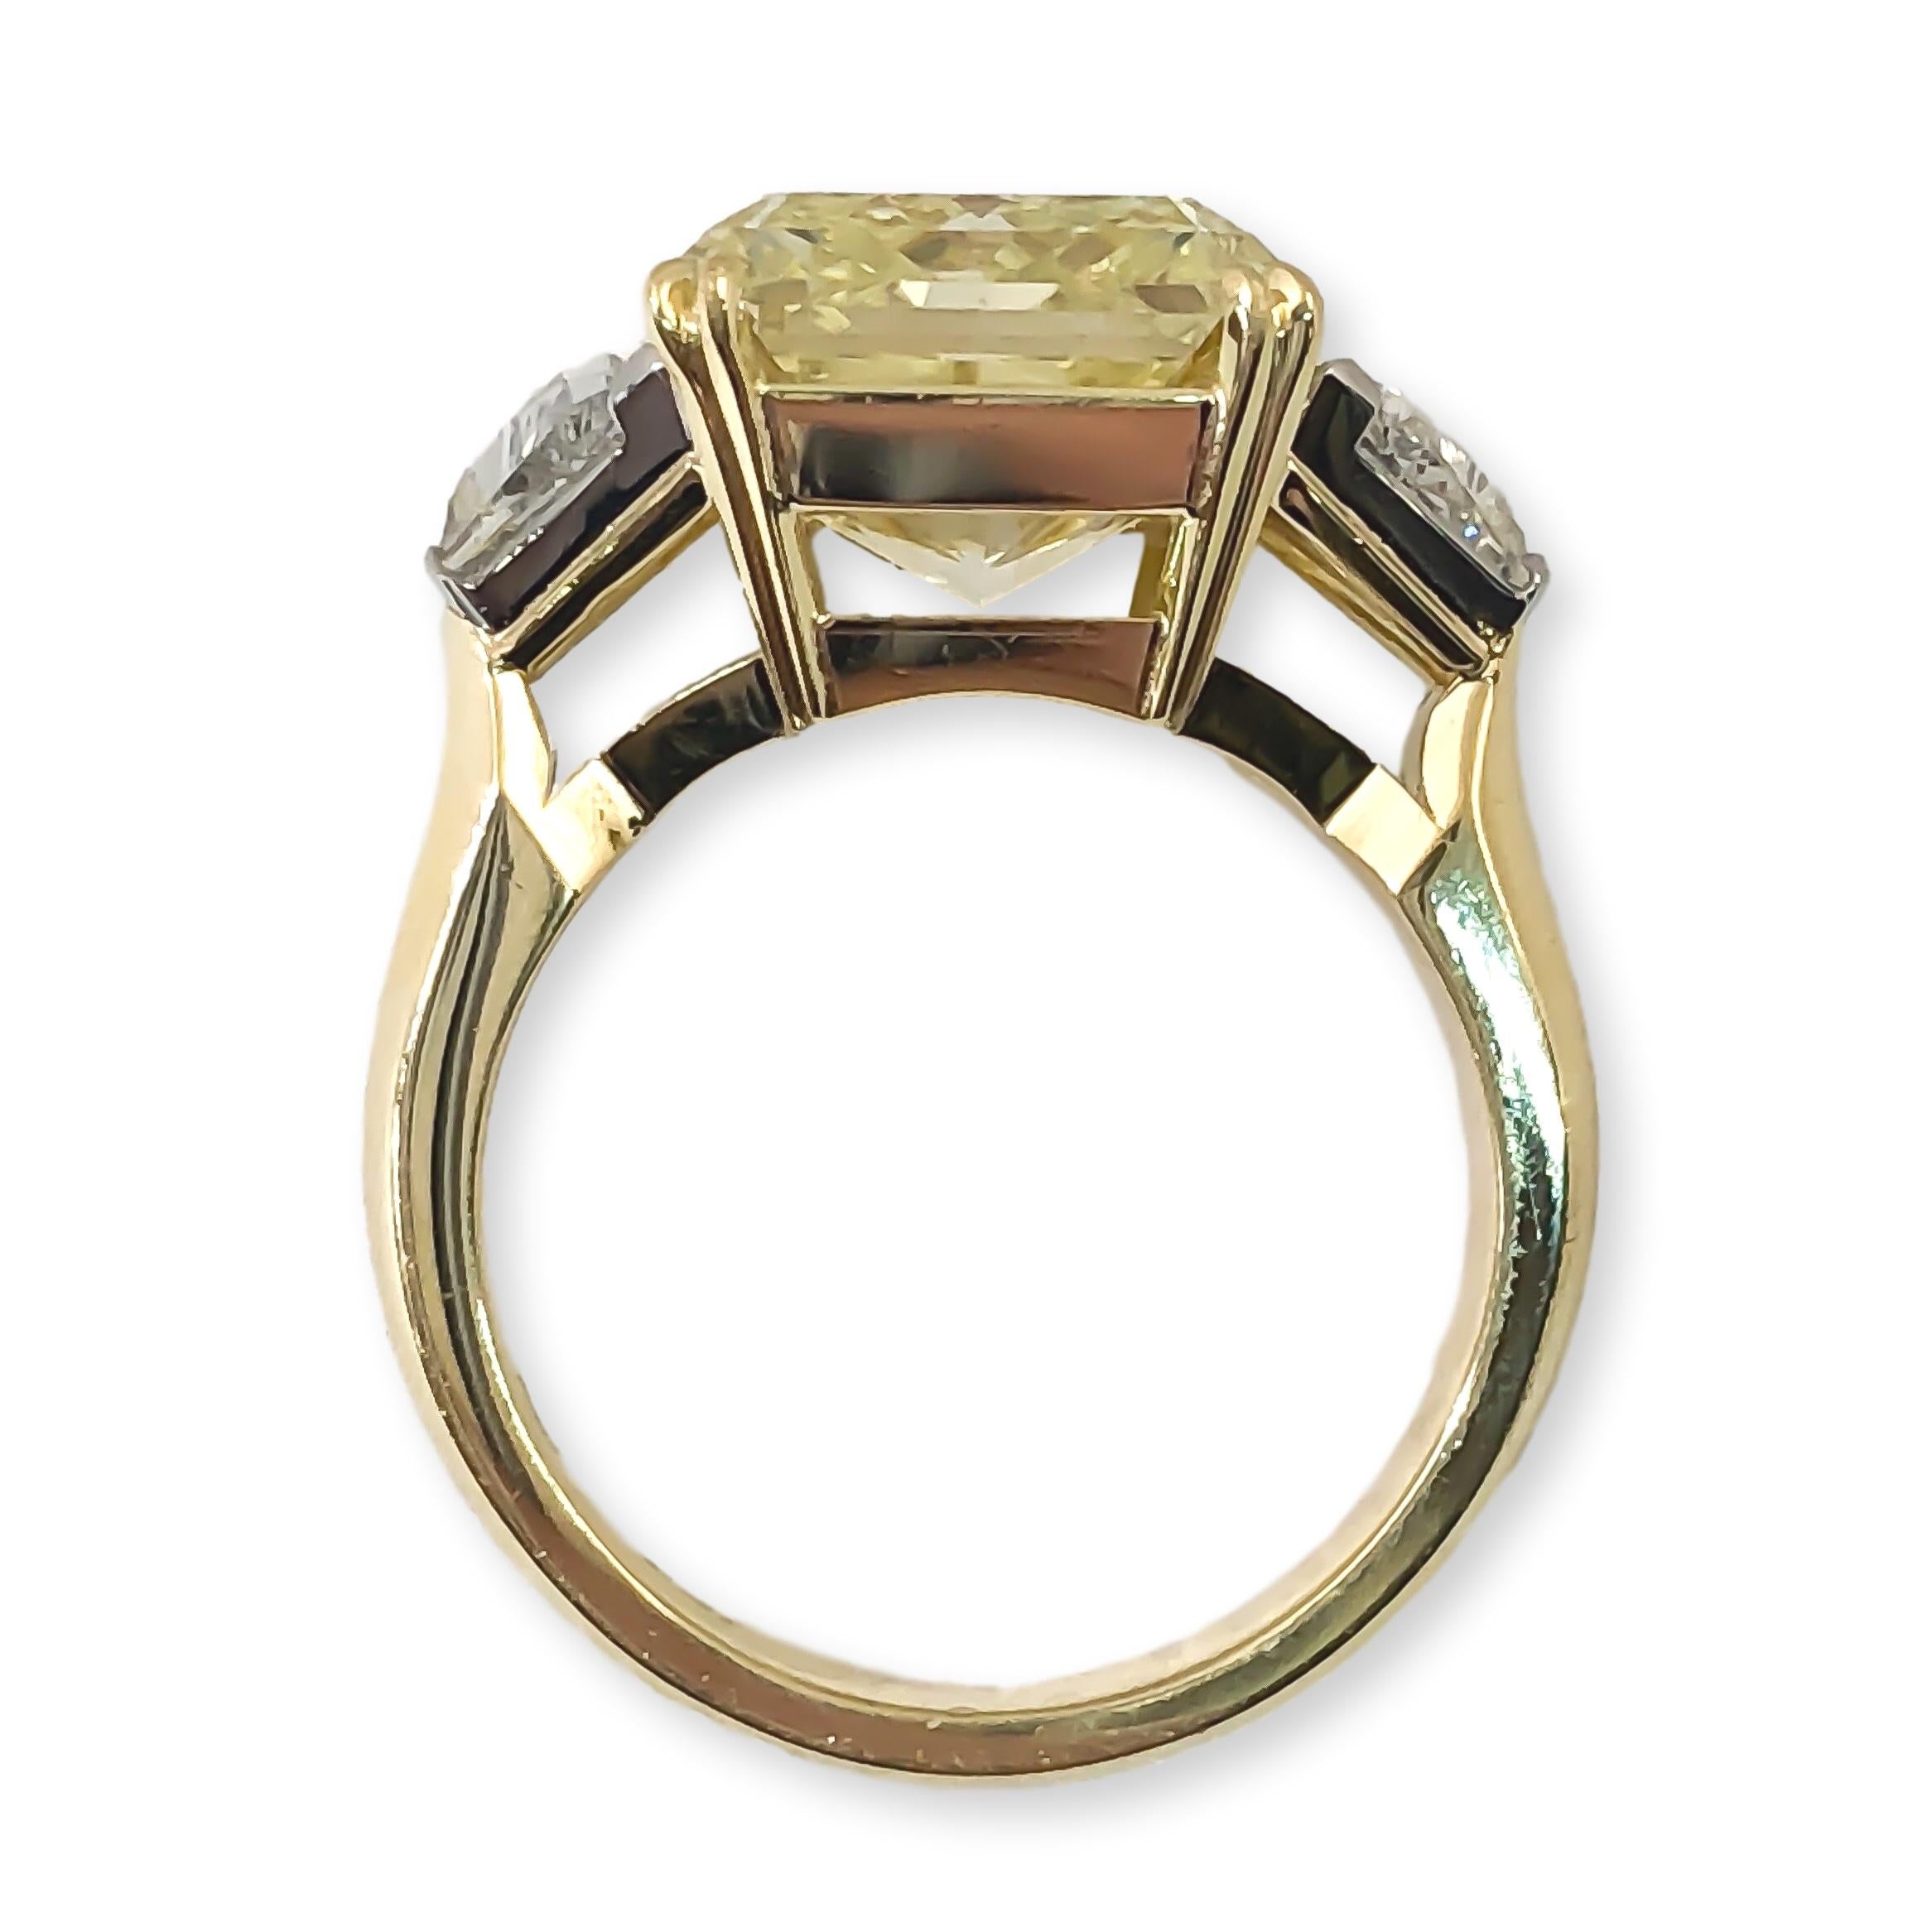 This ring is designed and hand fabricated by Mark Areias Jewelers in Platinum and 18K yellow gold. The center diamond is an fancy cushion shape rare fancy yellow color set in yellow gold double prongs. The center diamond is flanked by two white